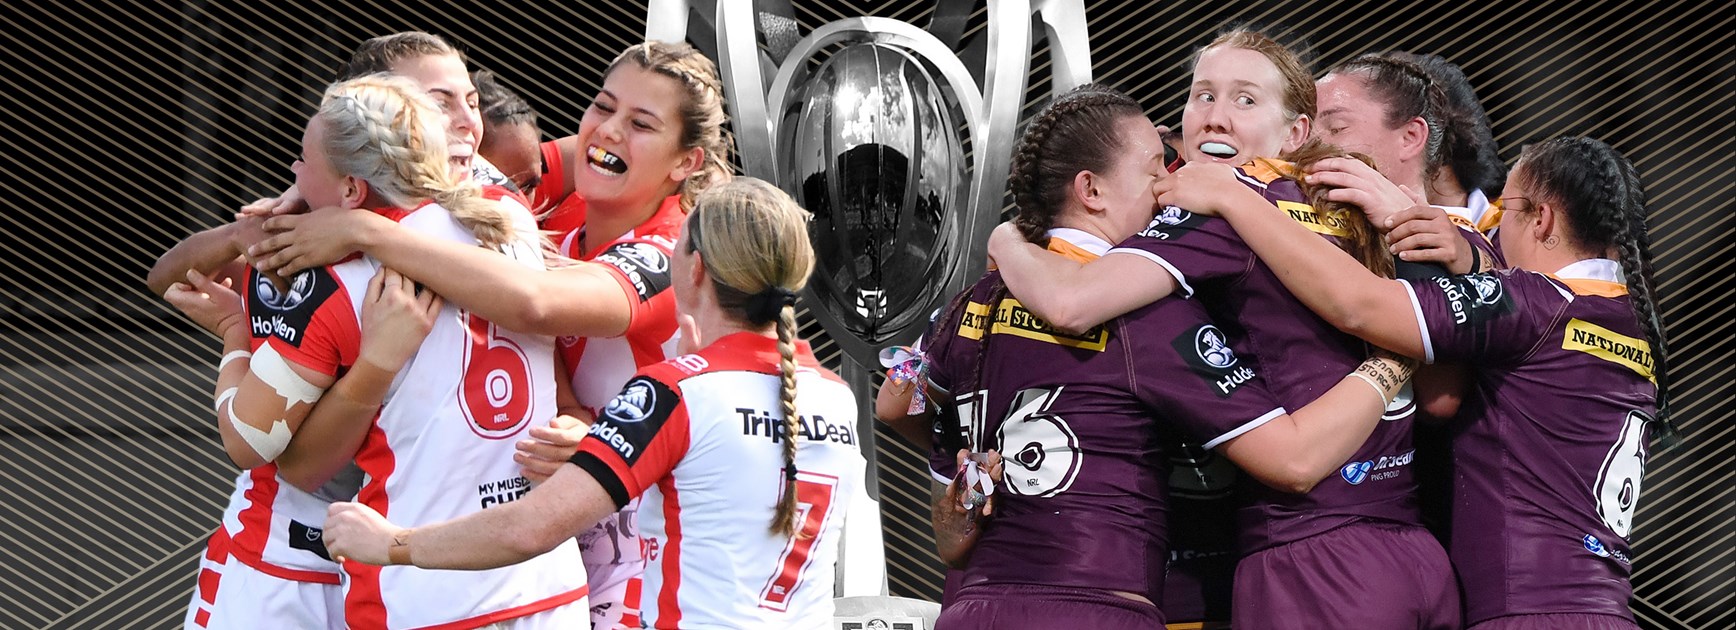 NRLW grand final winner: the experts at NRL.com have their say